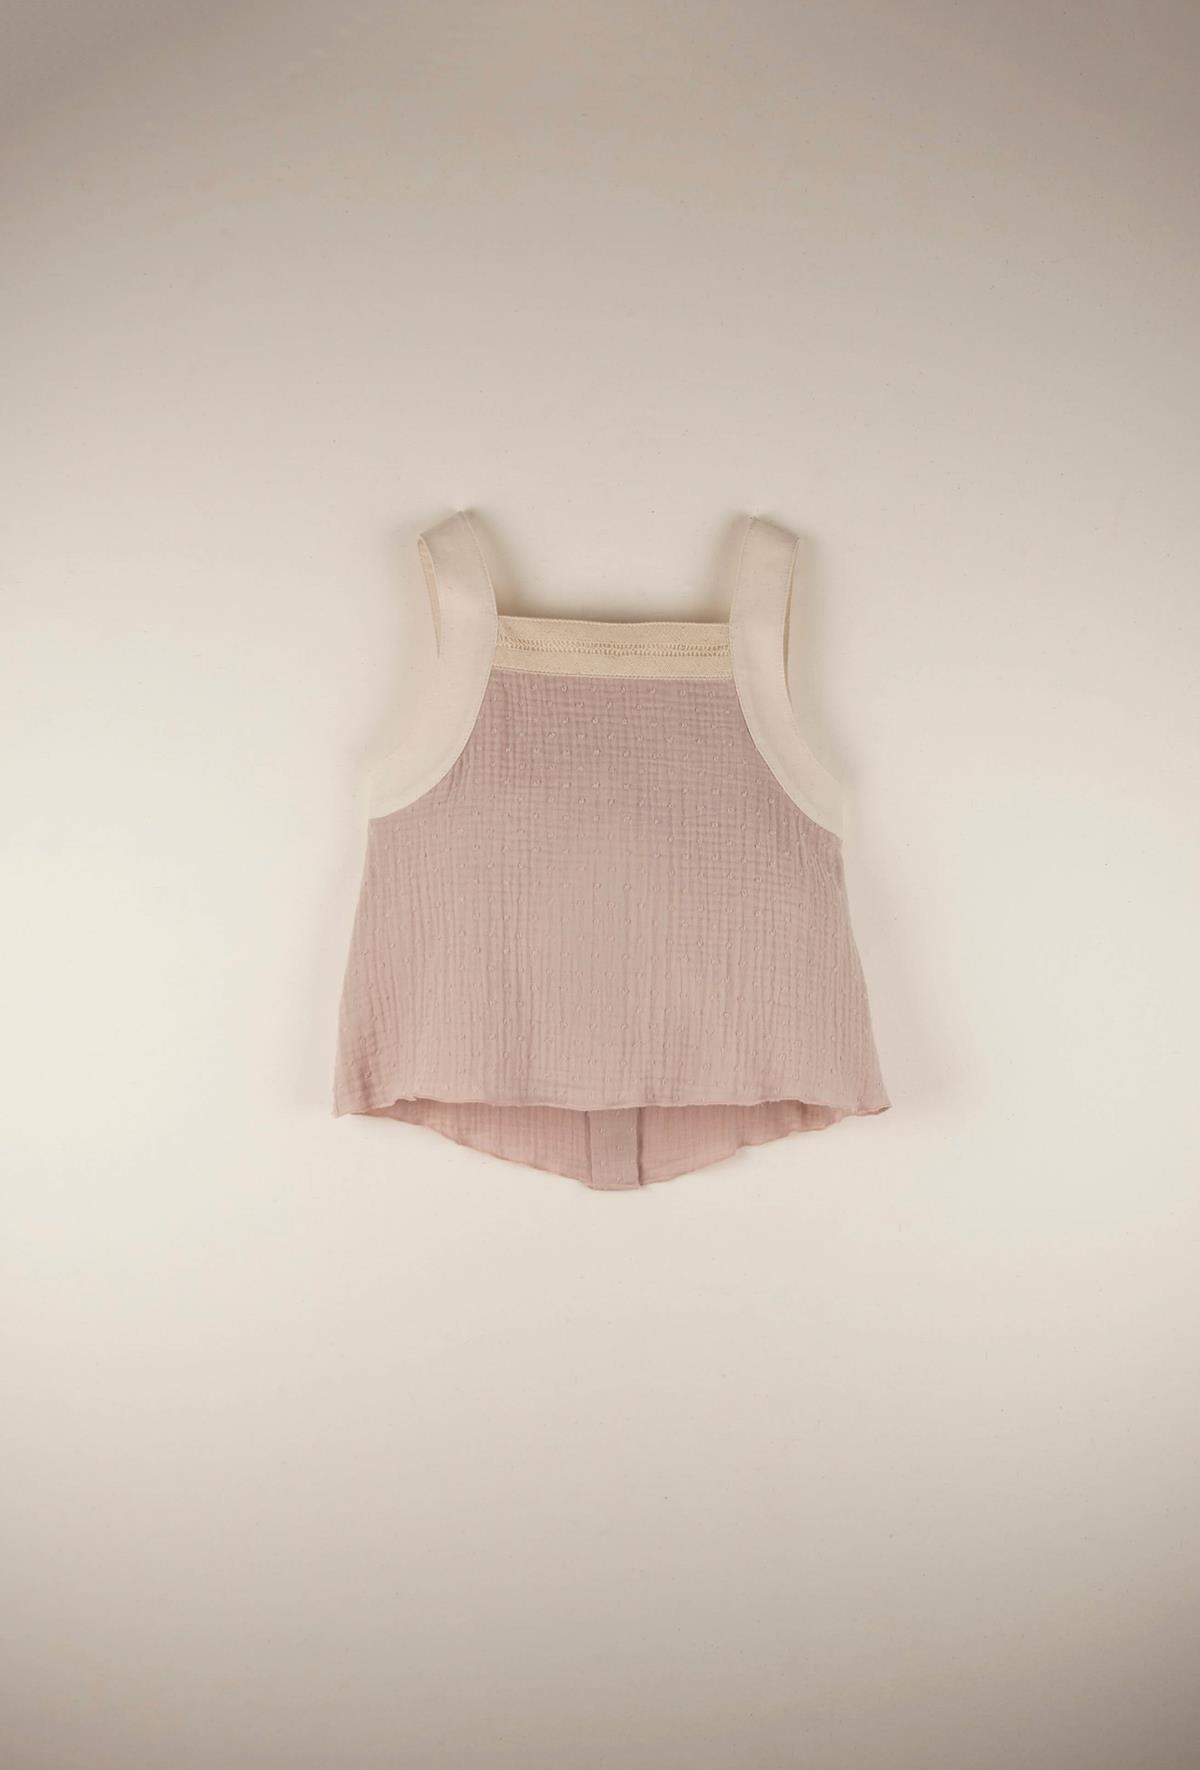 Mod.19.2 Pink organic blouse with straps | SS22 Mod.19.2 Pink organic blouse with straps | 1